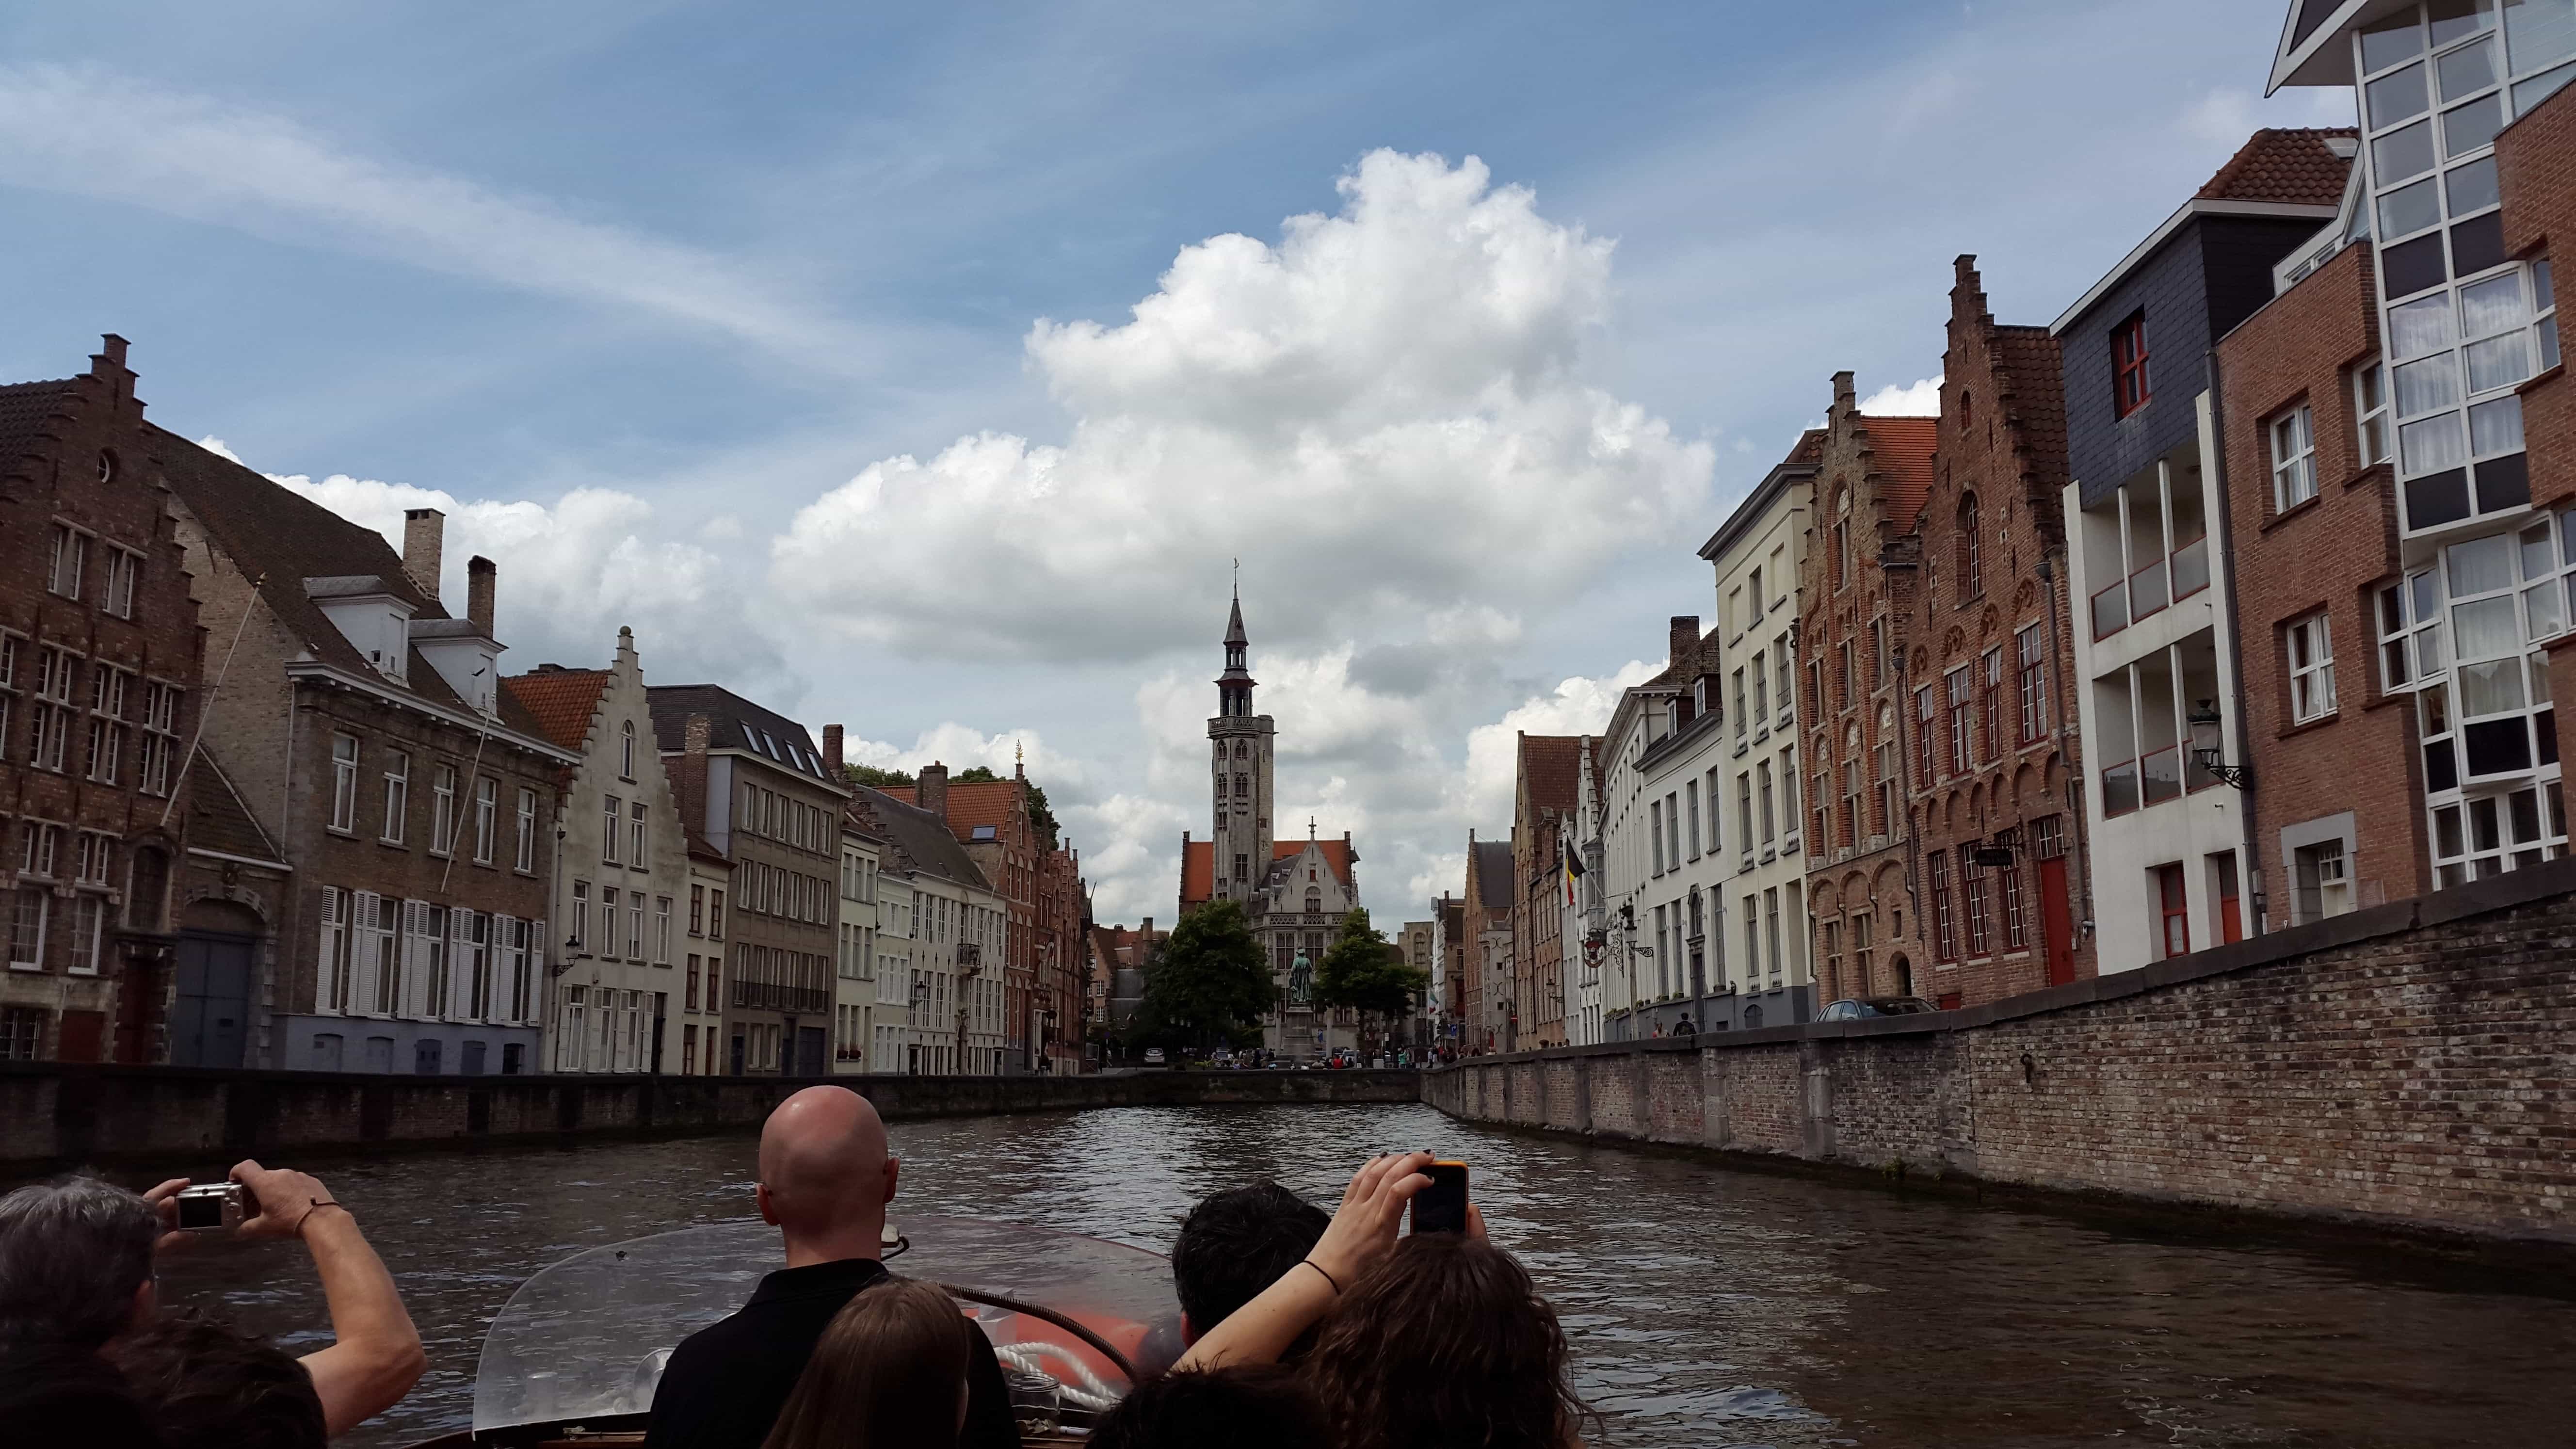 Rozenhoedkaai canal boat ride,Church of Our Lady, Bruges